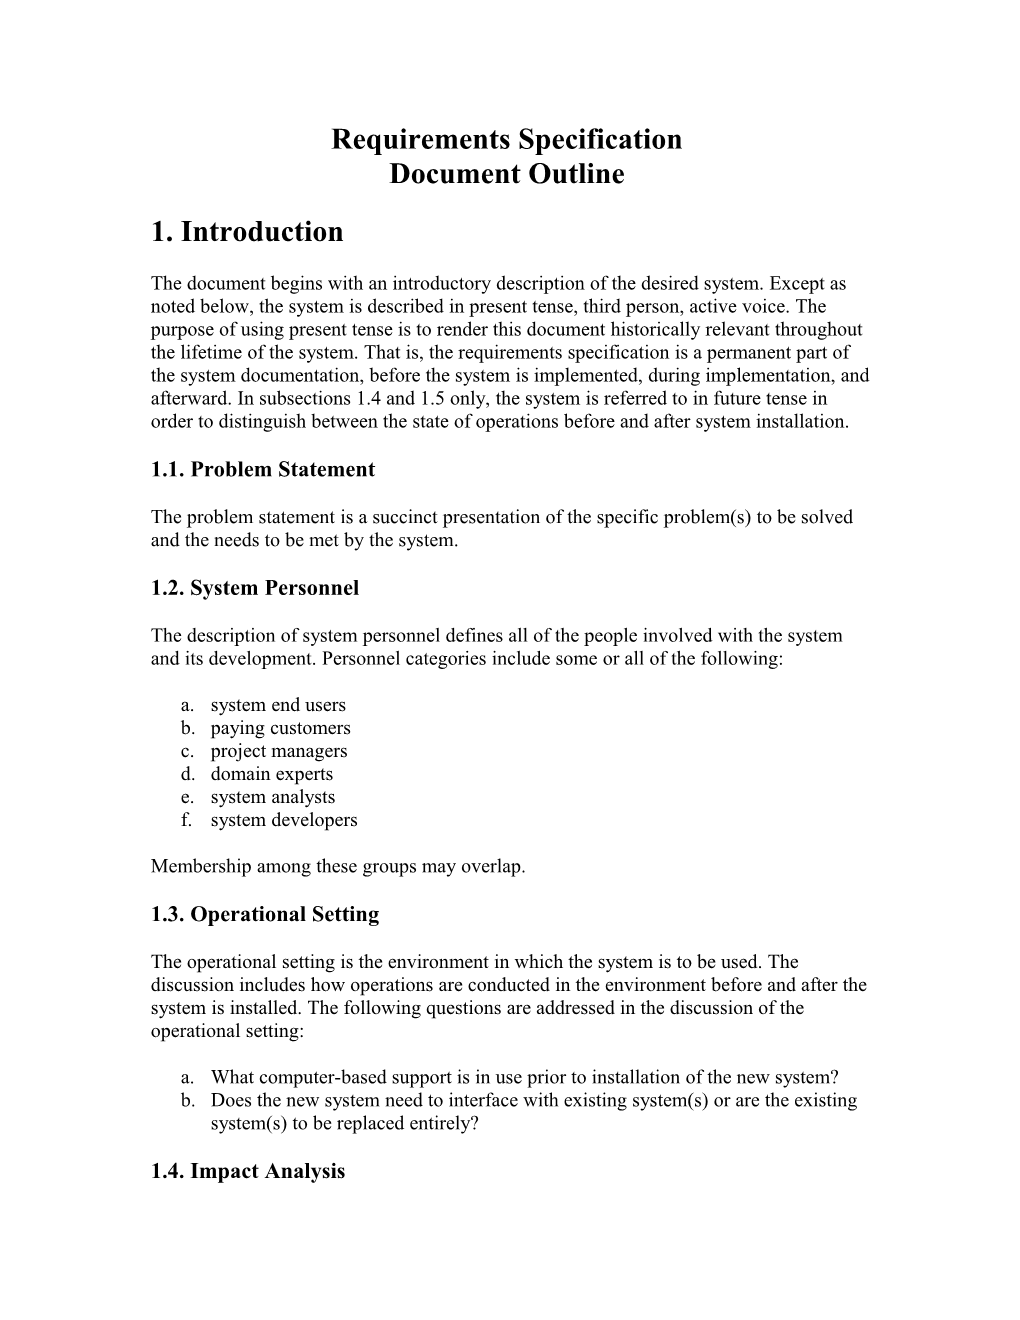 Requirements Specification Document Outline